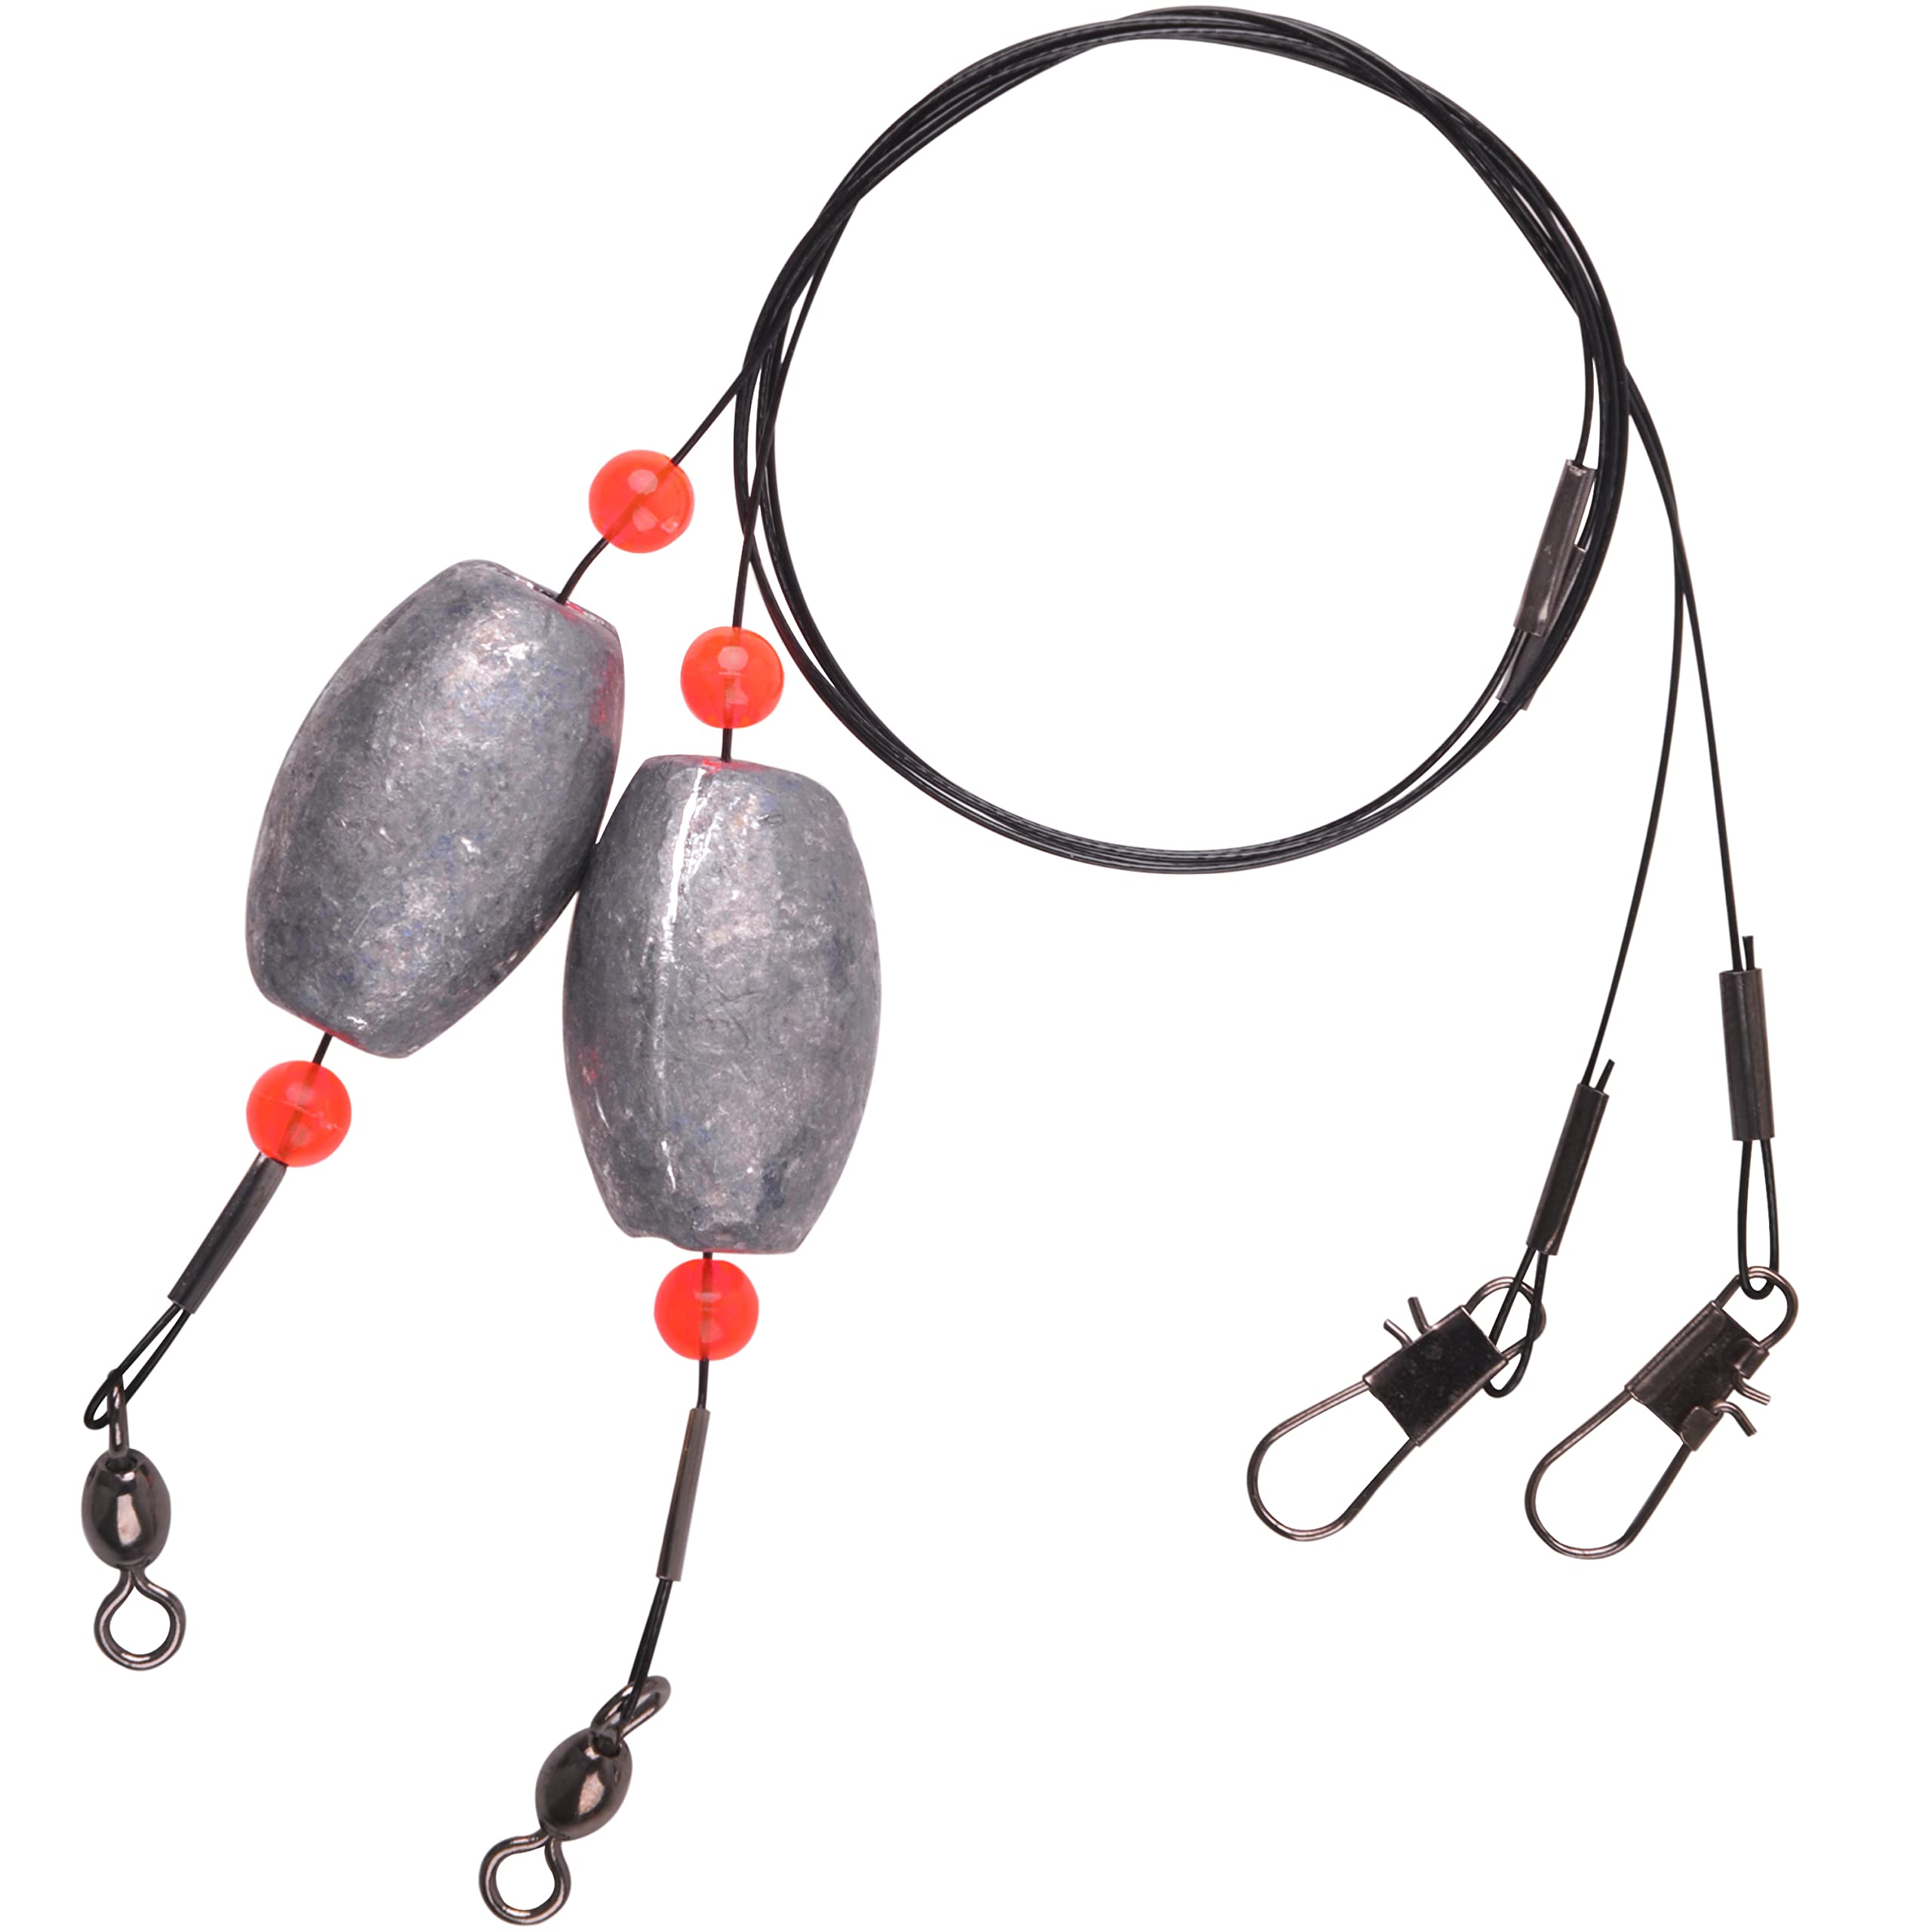 Fishing Egg Sinker Weight Rigs, Stainless Steel Fishing Wire Leaders with  Sinkers Fish Swivels and Snaps